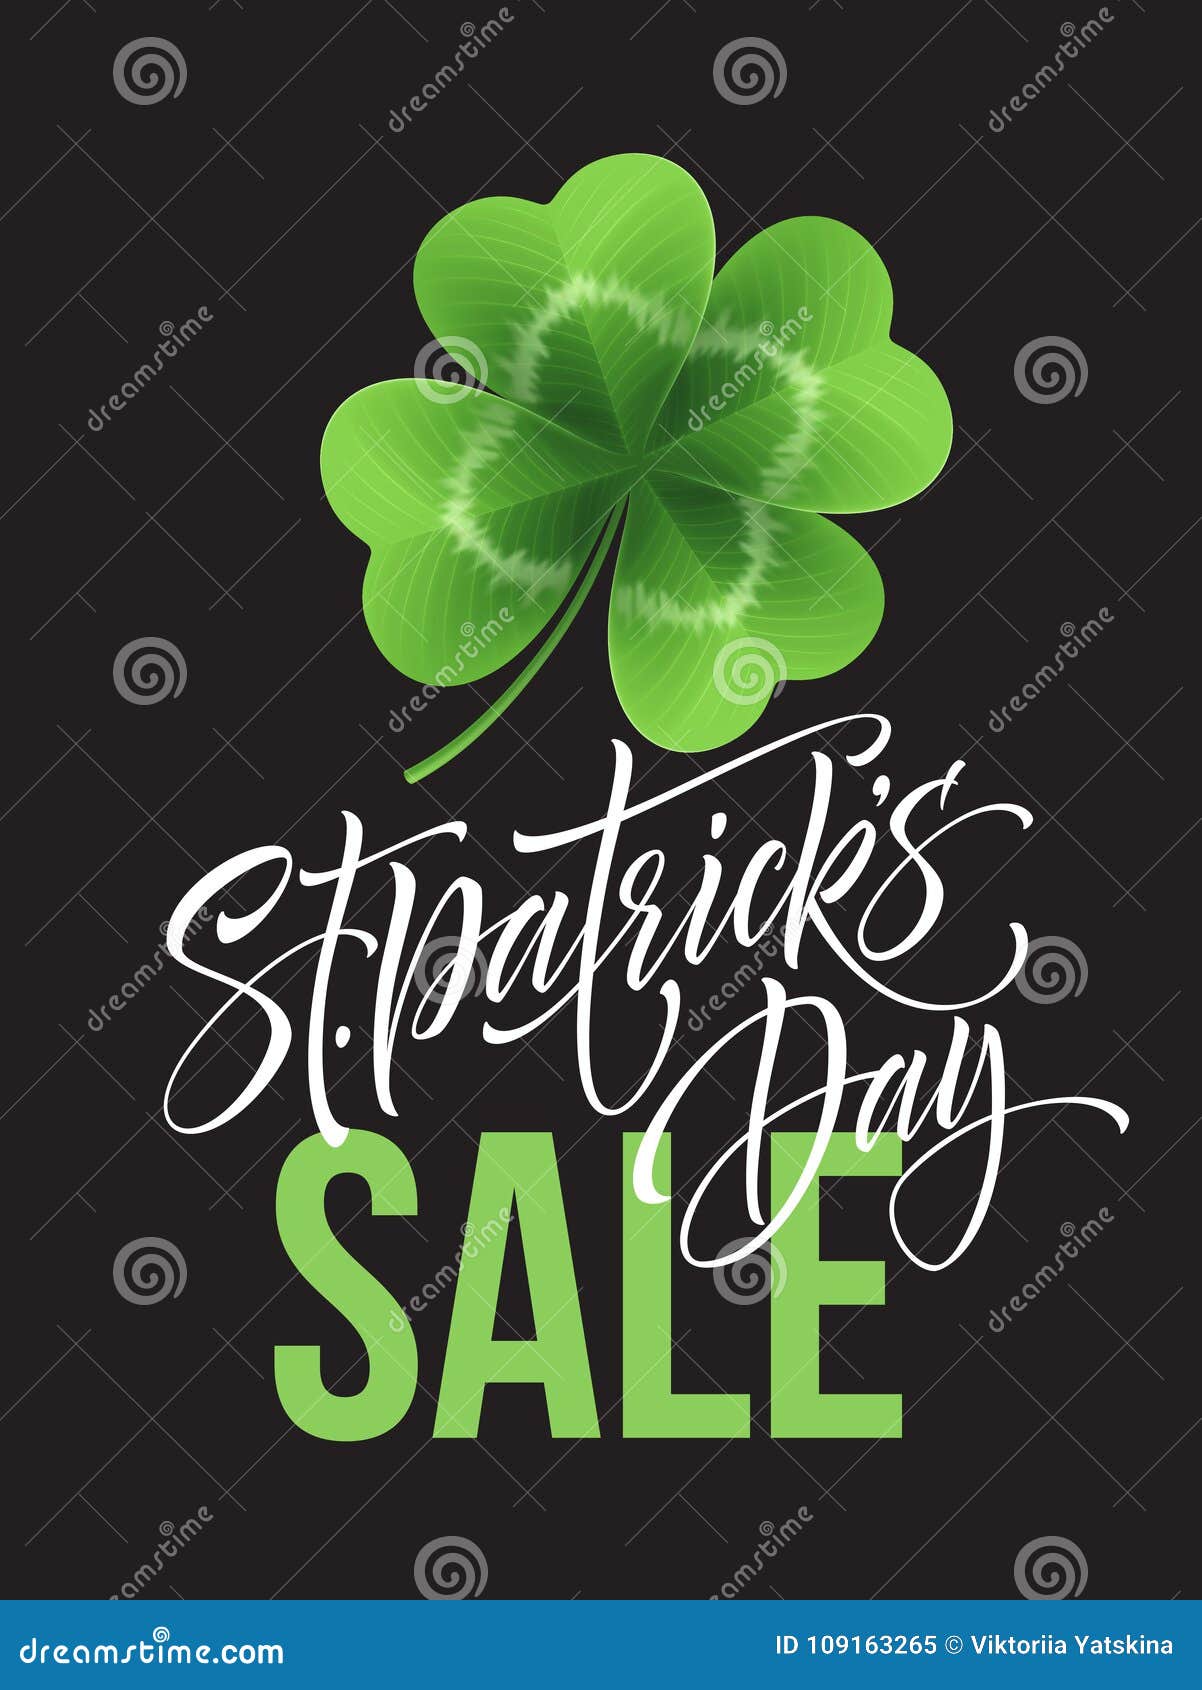 saint patricks day sale poster. lettering typography banner template.  